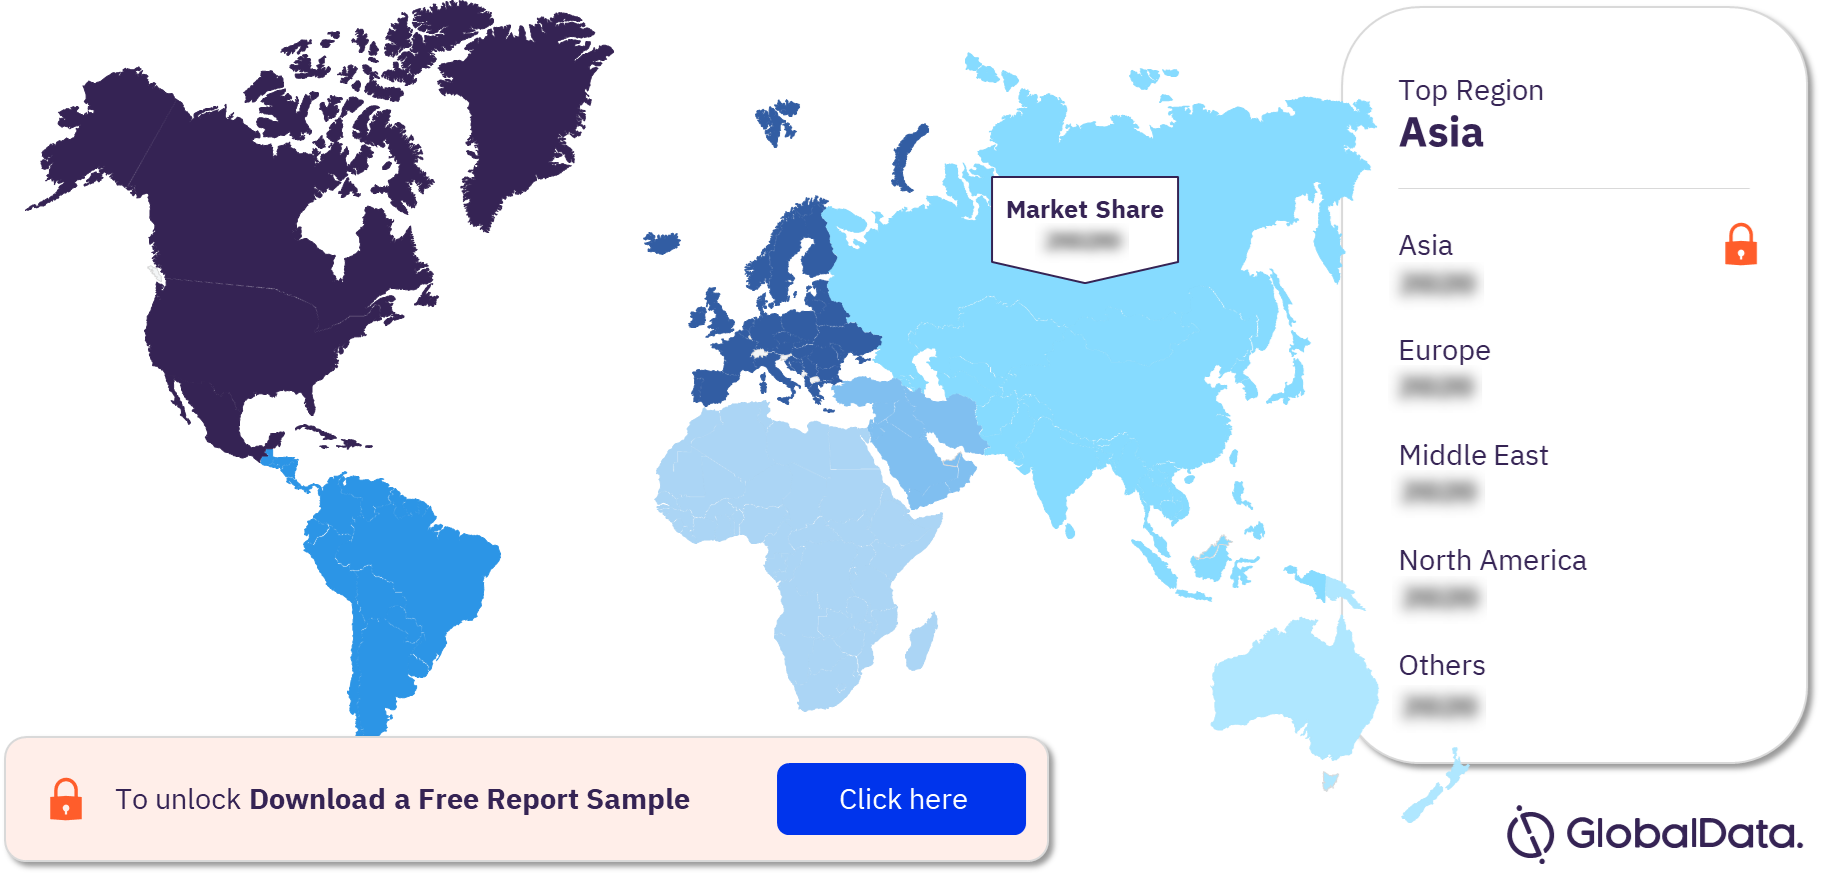 Global Butadiene Capacity and Capital Market Analysis, by Regions, 2022 (%)